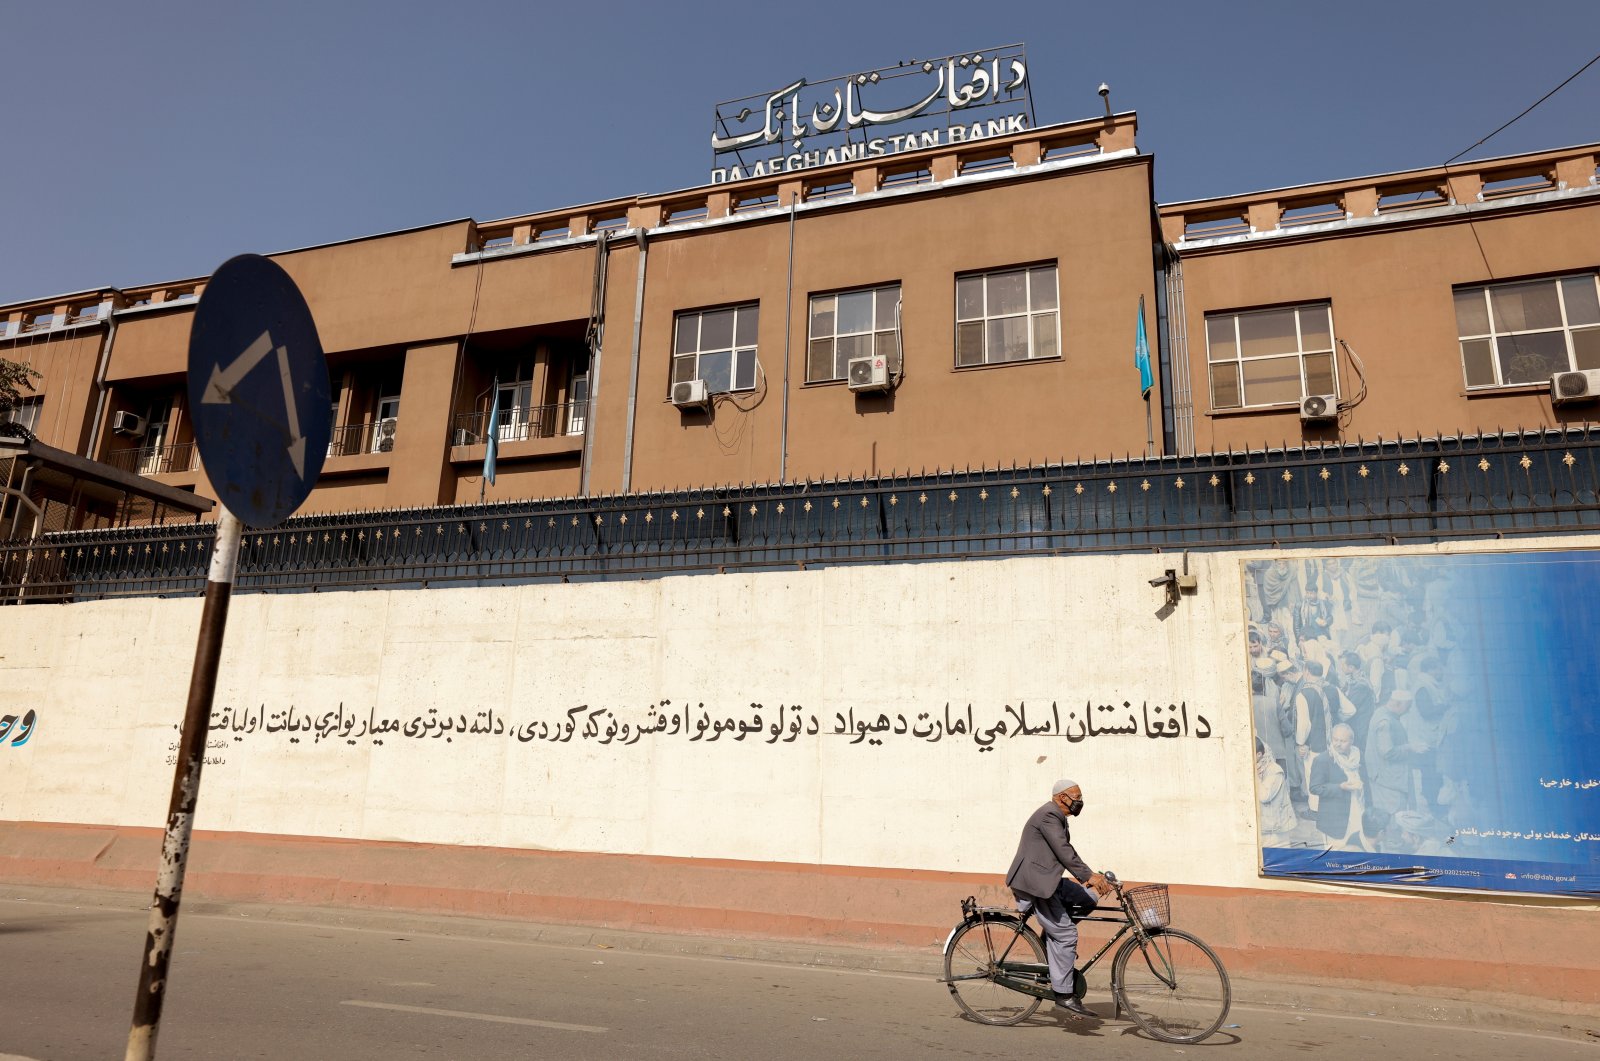 A man rides a bike in front of the Bank of Afghanistan in Kabul, Afghanistan, Oct. 8, 2021. (Reuters File Photo)